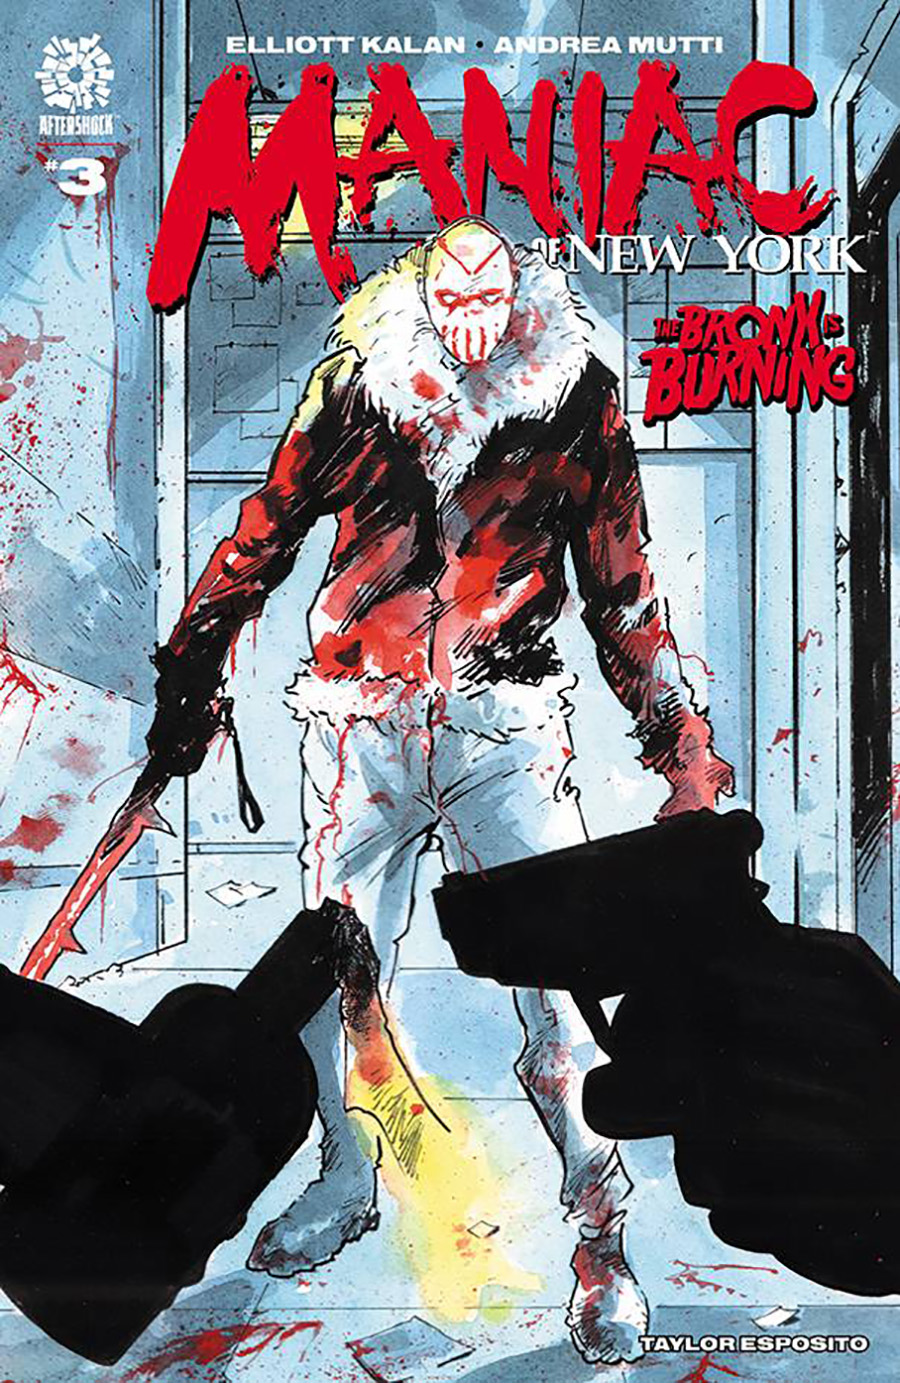 Maniac Of New York Bronx Is Burning #3 Cover A Regular Andrea Mutti Cover